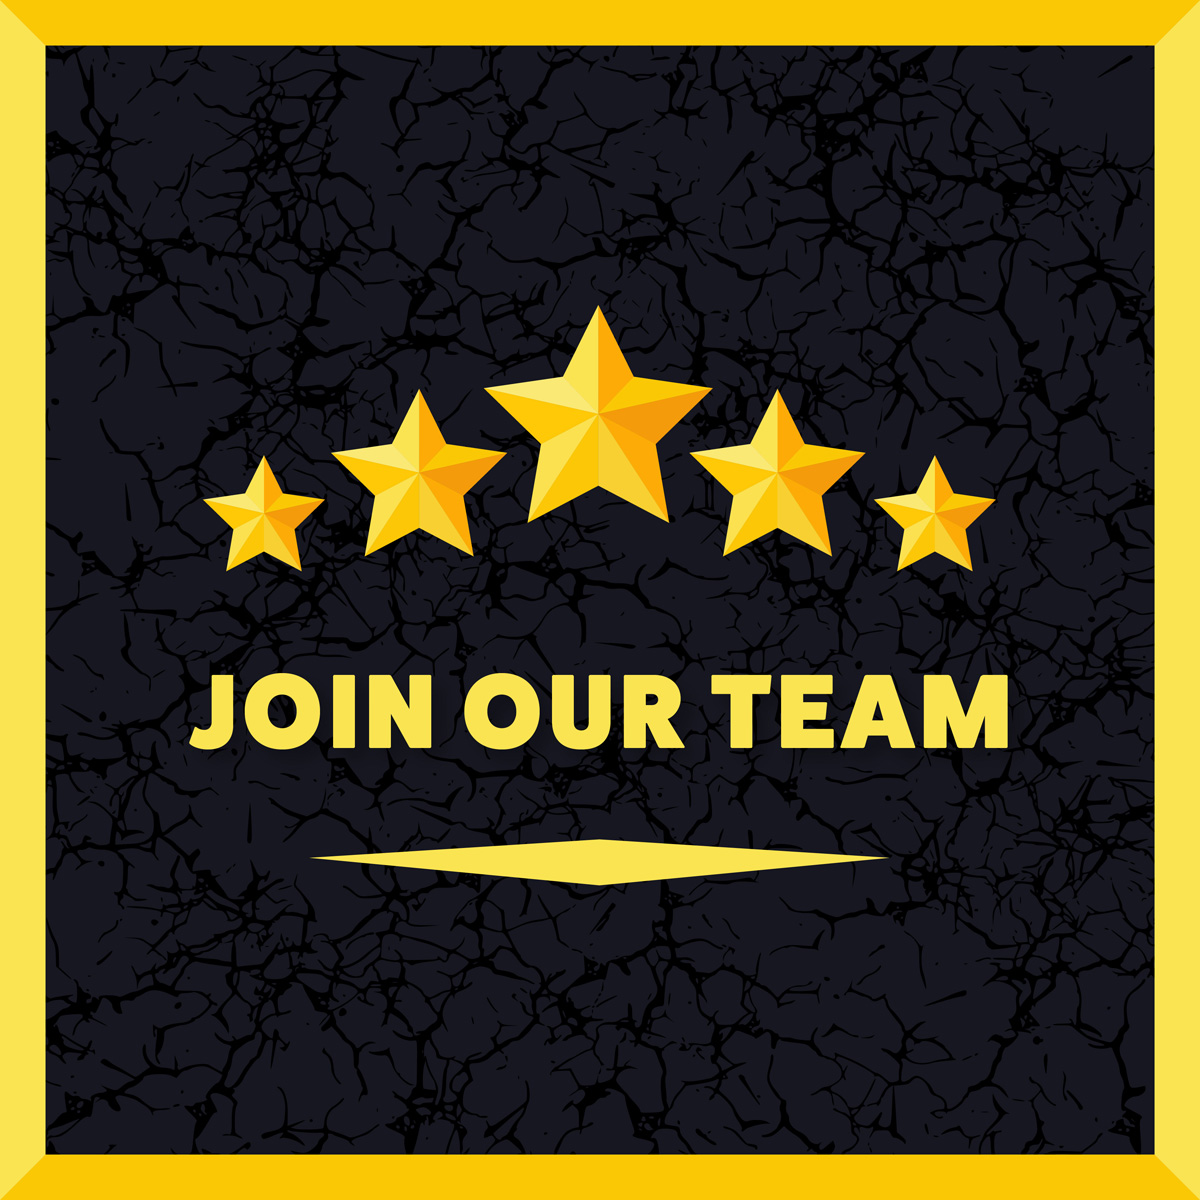 Calling all superstars! We're looking for our next 5-star recruit. Join our winning team and give us a call today! #5StarRecruit #WinningTeam